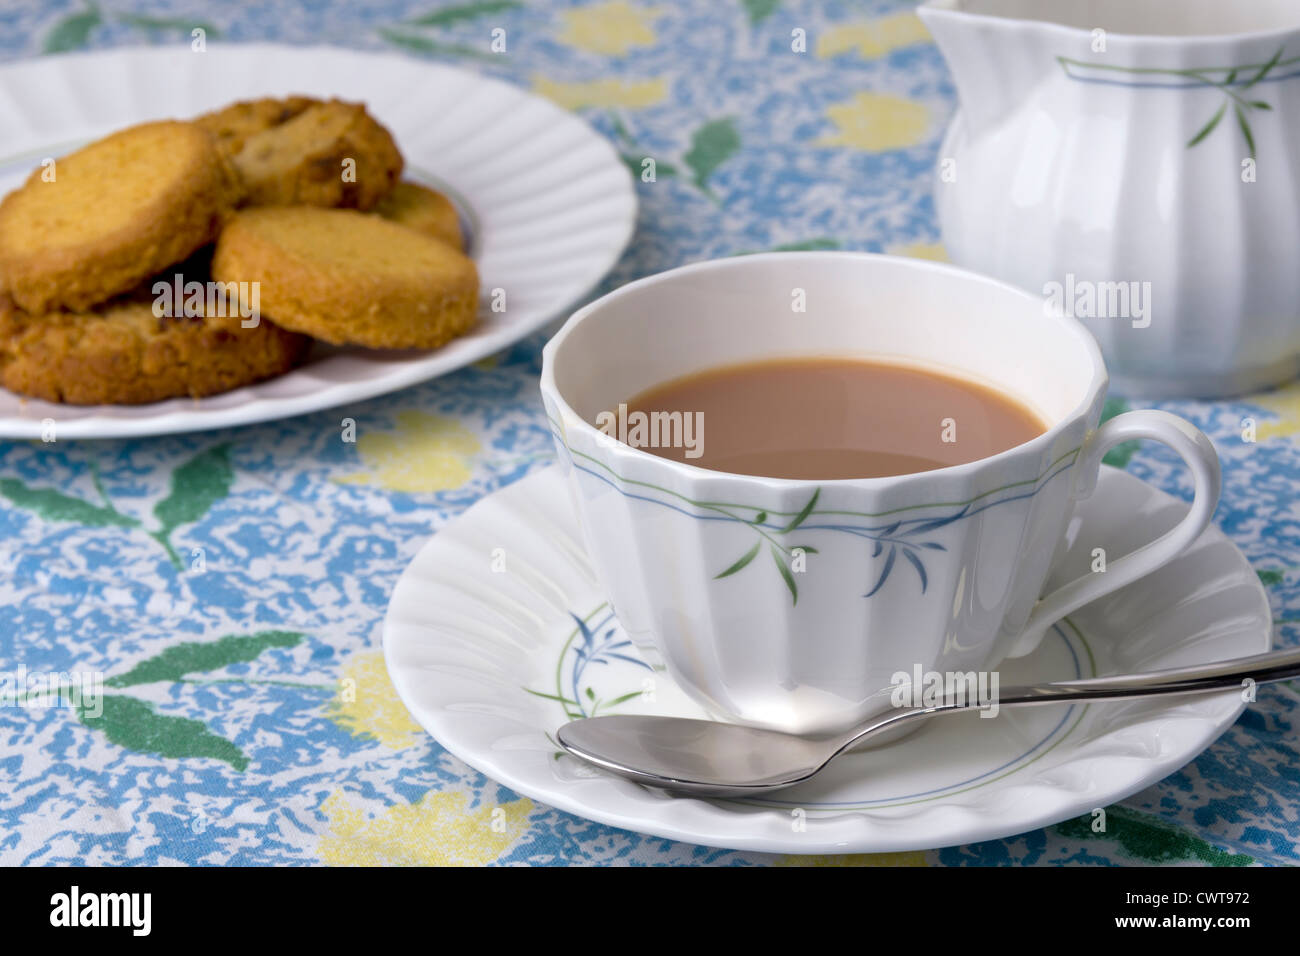 Afternoon cup of tea with biscuits. Stock Photo